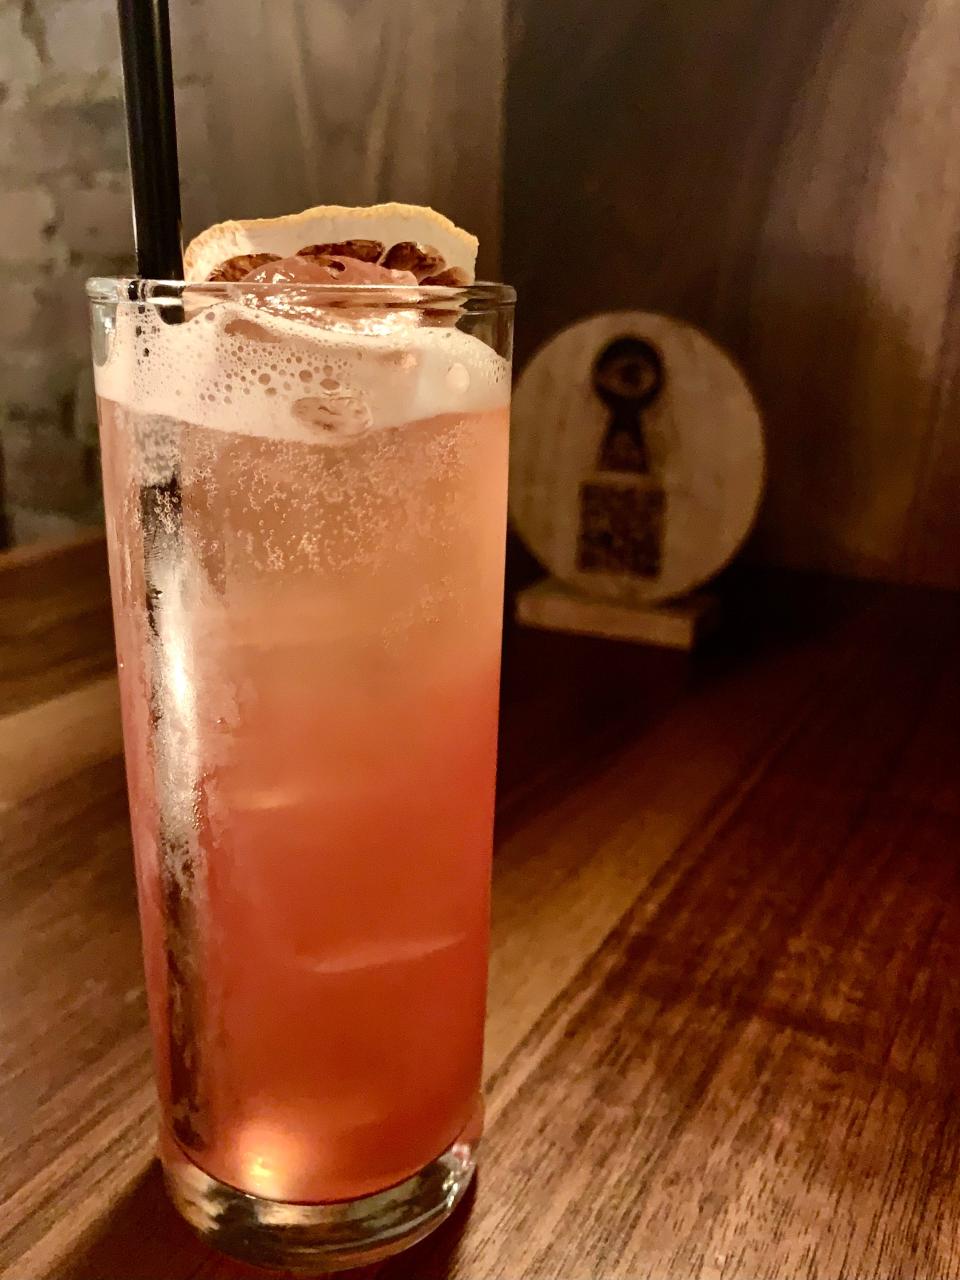 The Plumsucker - a non-alcoholic cocktail from The Red Door bar in Providence featuring spiced rum shrub, spices and lemon.